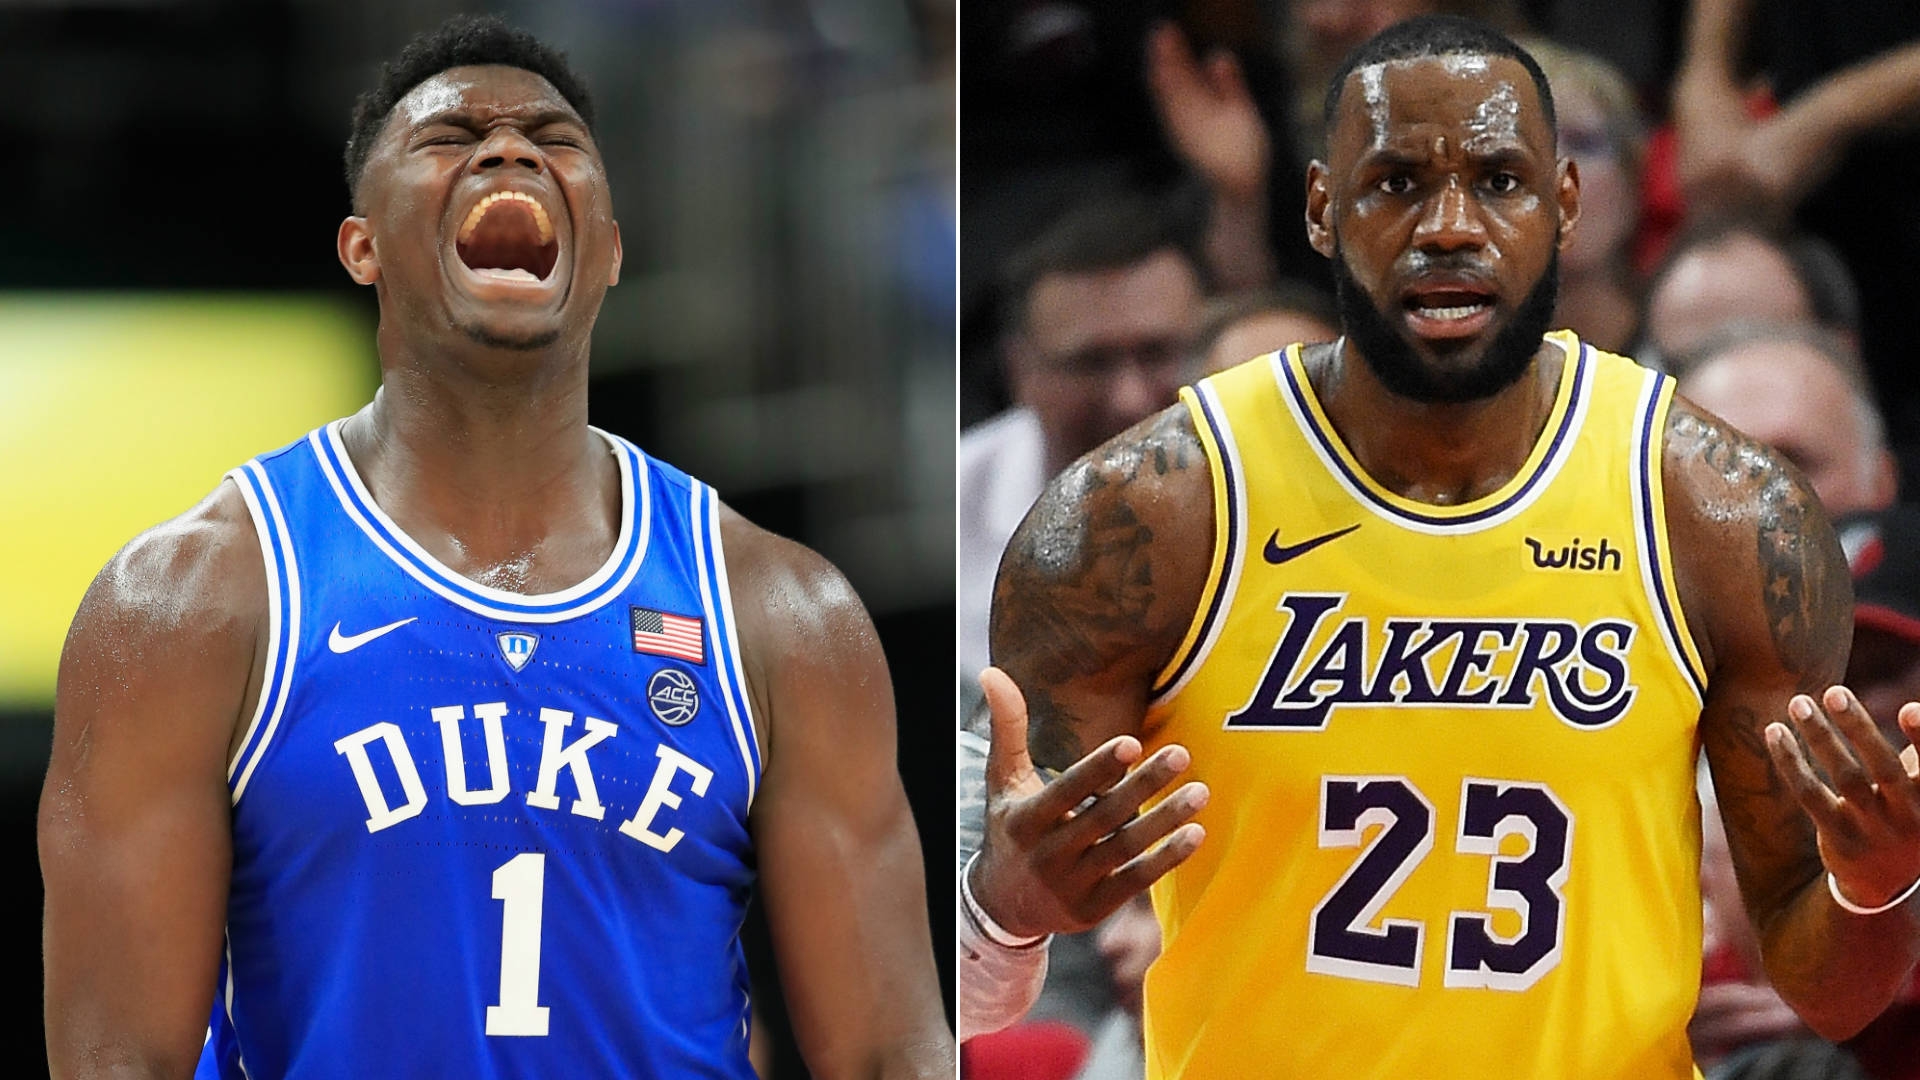 NBA: Zion Williamson Becomes New LeBron James Replacement ...